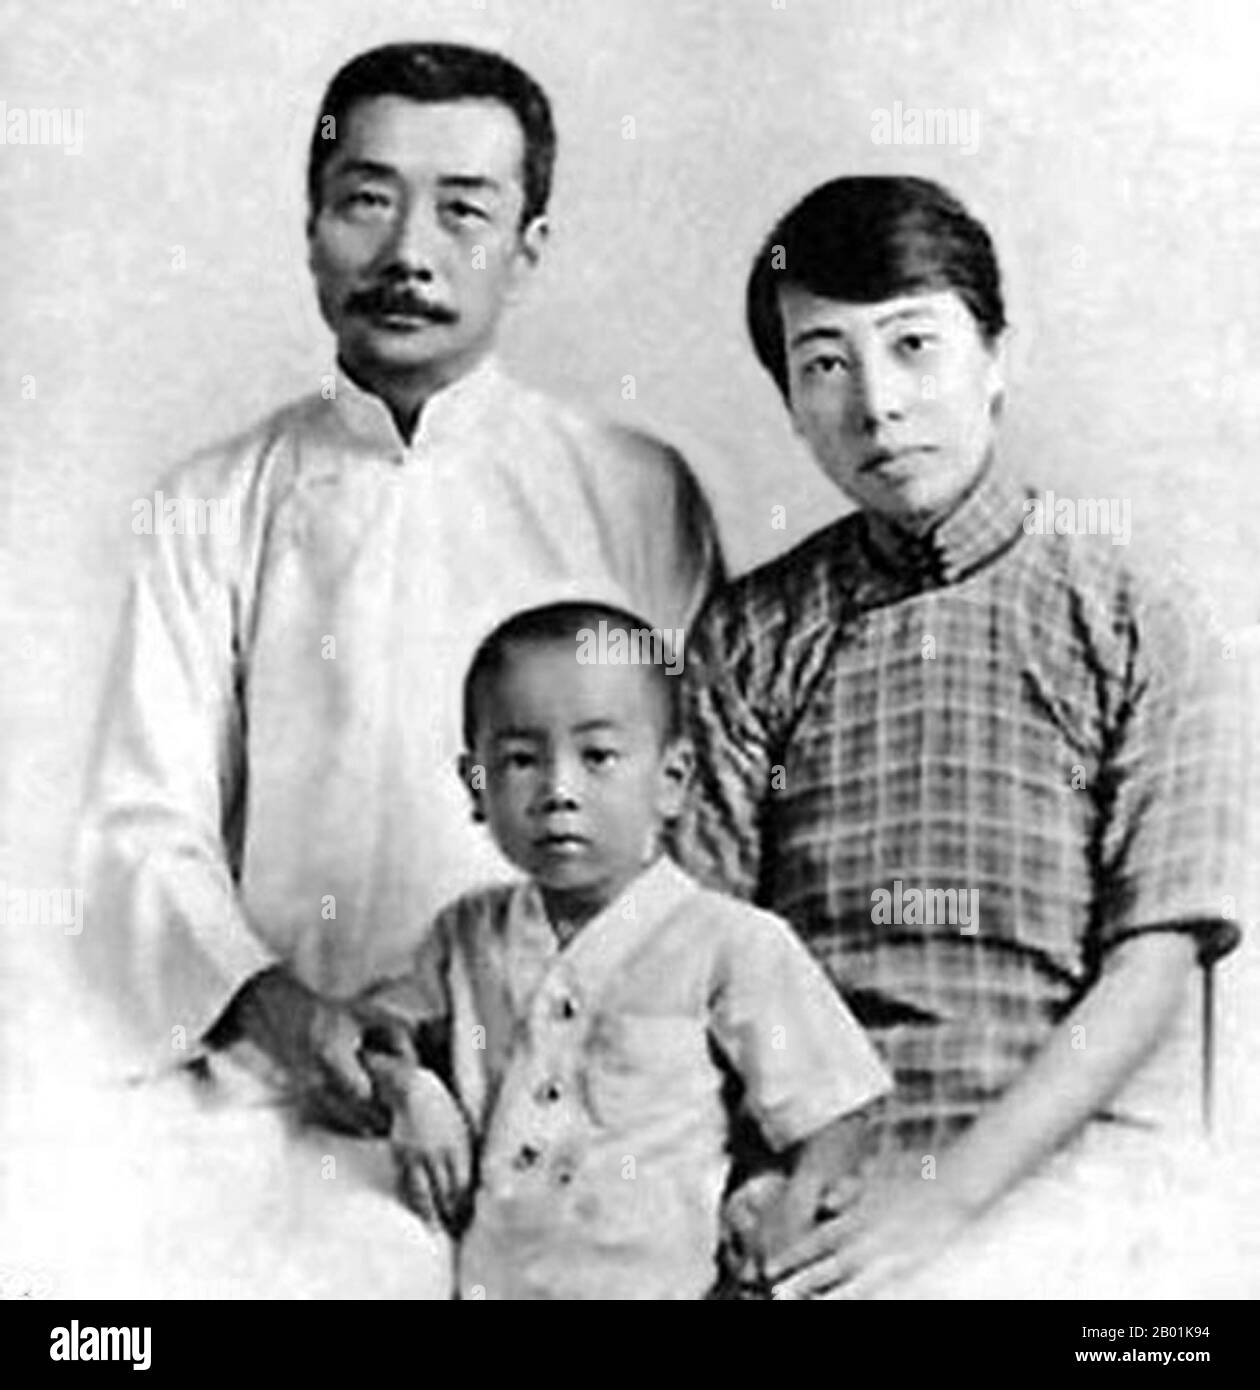 China: Writer and Novelist Lu Xun (25 September 1881 - 19 October 1936) with his wife Guang Ping and son Haiying, Shanghai, c. 1934.  Lu Xun (or Lu Hsun), was the pen name of Zhou Shuren (Chou Shu-jen). He was one of the major Chinese writers of the 20th century. Considered by many to be the founder of modern Chinese literature, he wrote in baihua (the vernacular) as well as classical Chinese. Lu Xun was a short story writer, editor, translator, critic, essayist and poet. In the 1930s he became the titular head of the Chinese League of the Left-Wing Writers in Shanghai. Stock Photo